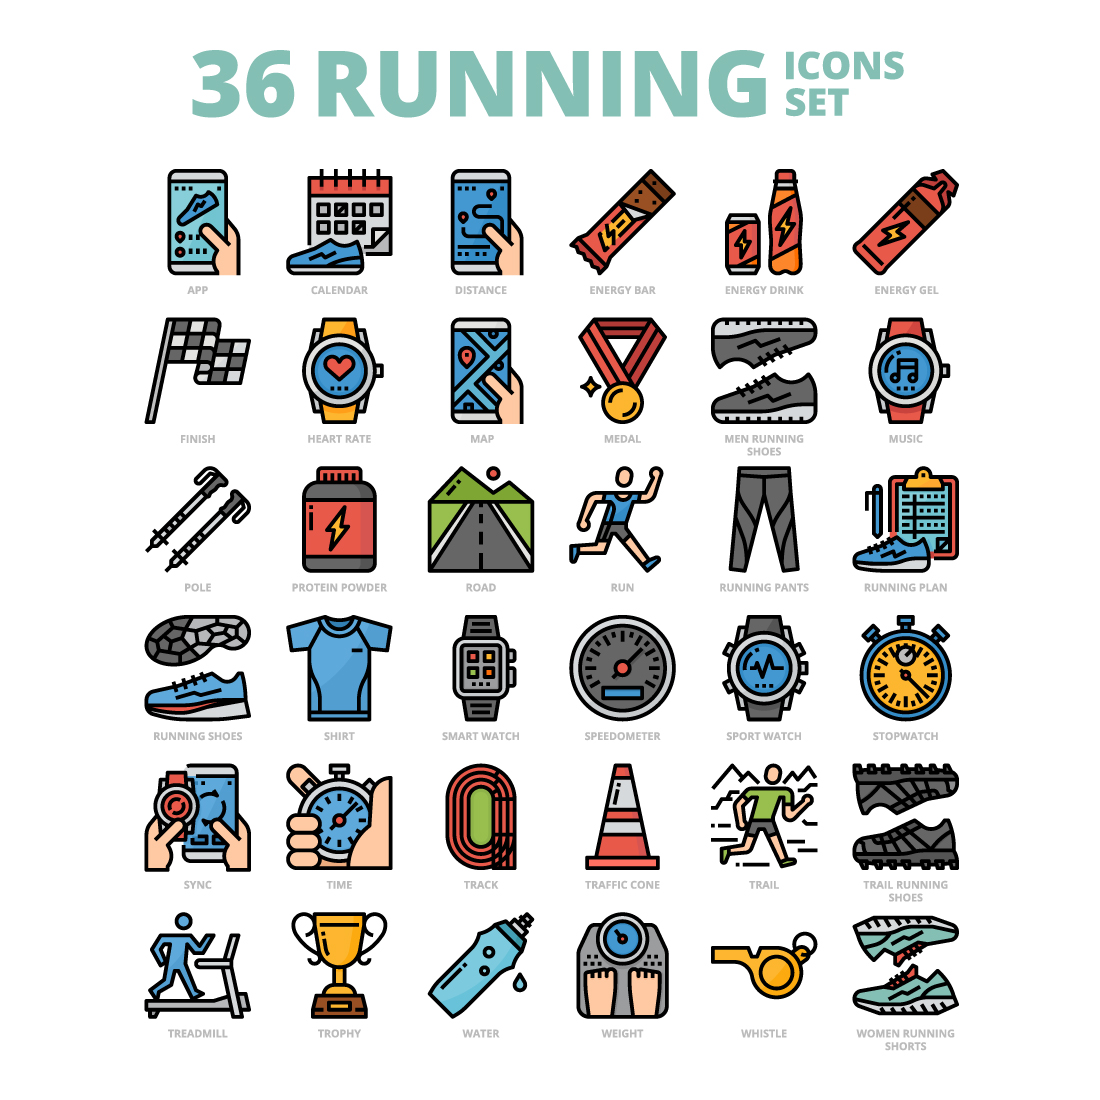 36 Running Icons Set x 4 Styles cover image.